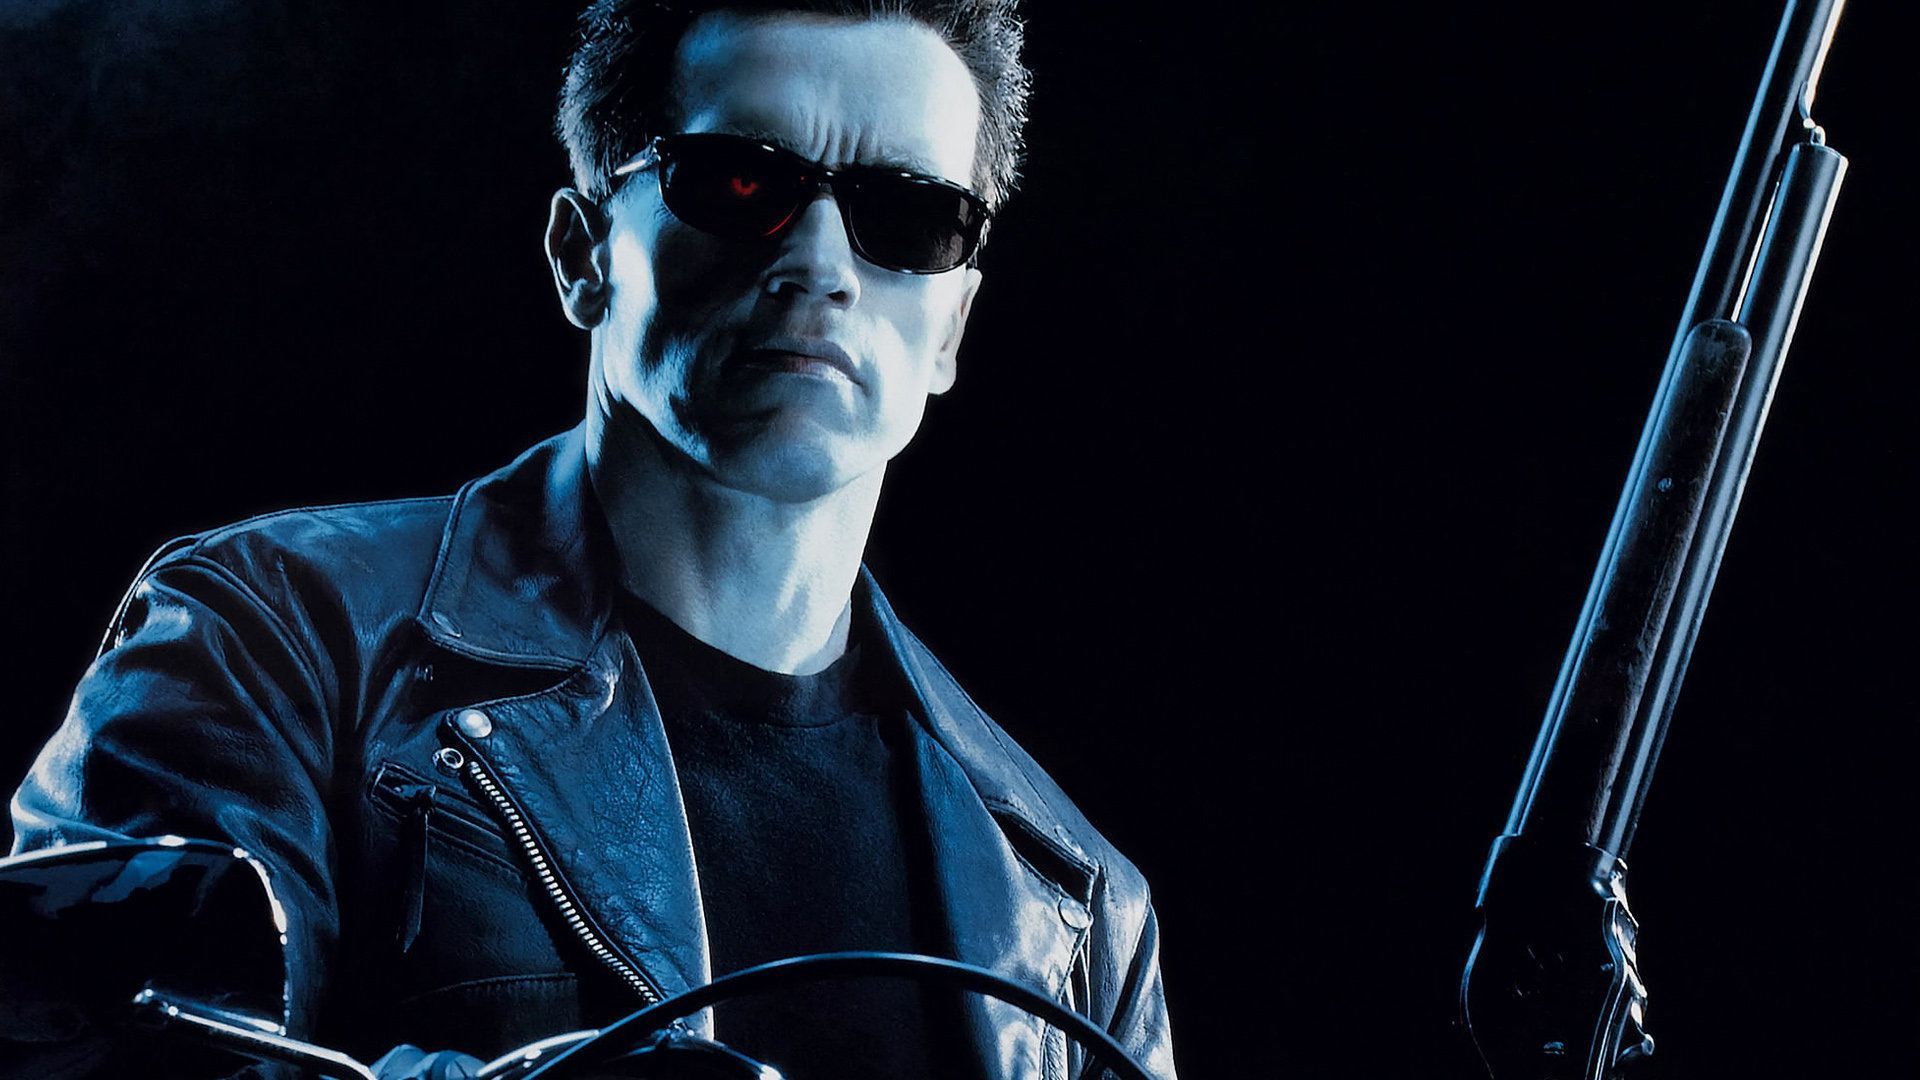 Terminator 2 Judgment Day wallpapers and images - wallpapers